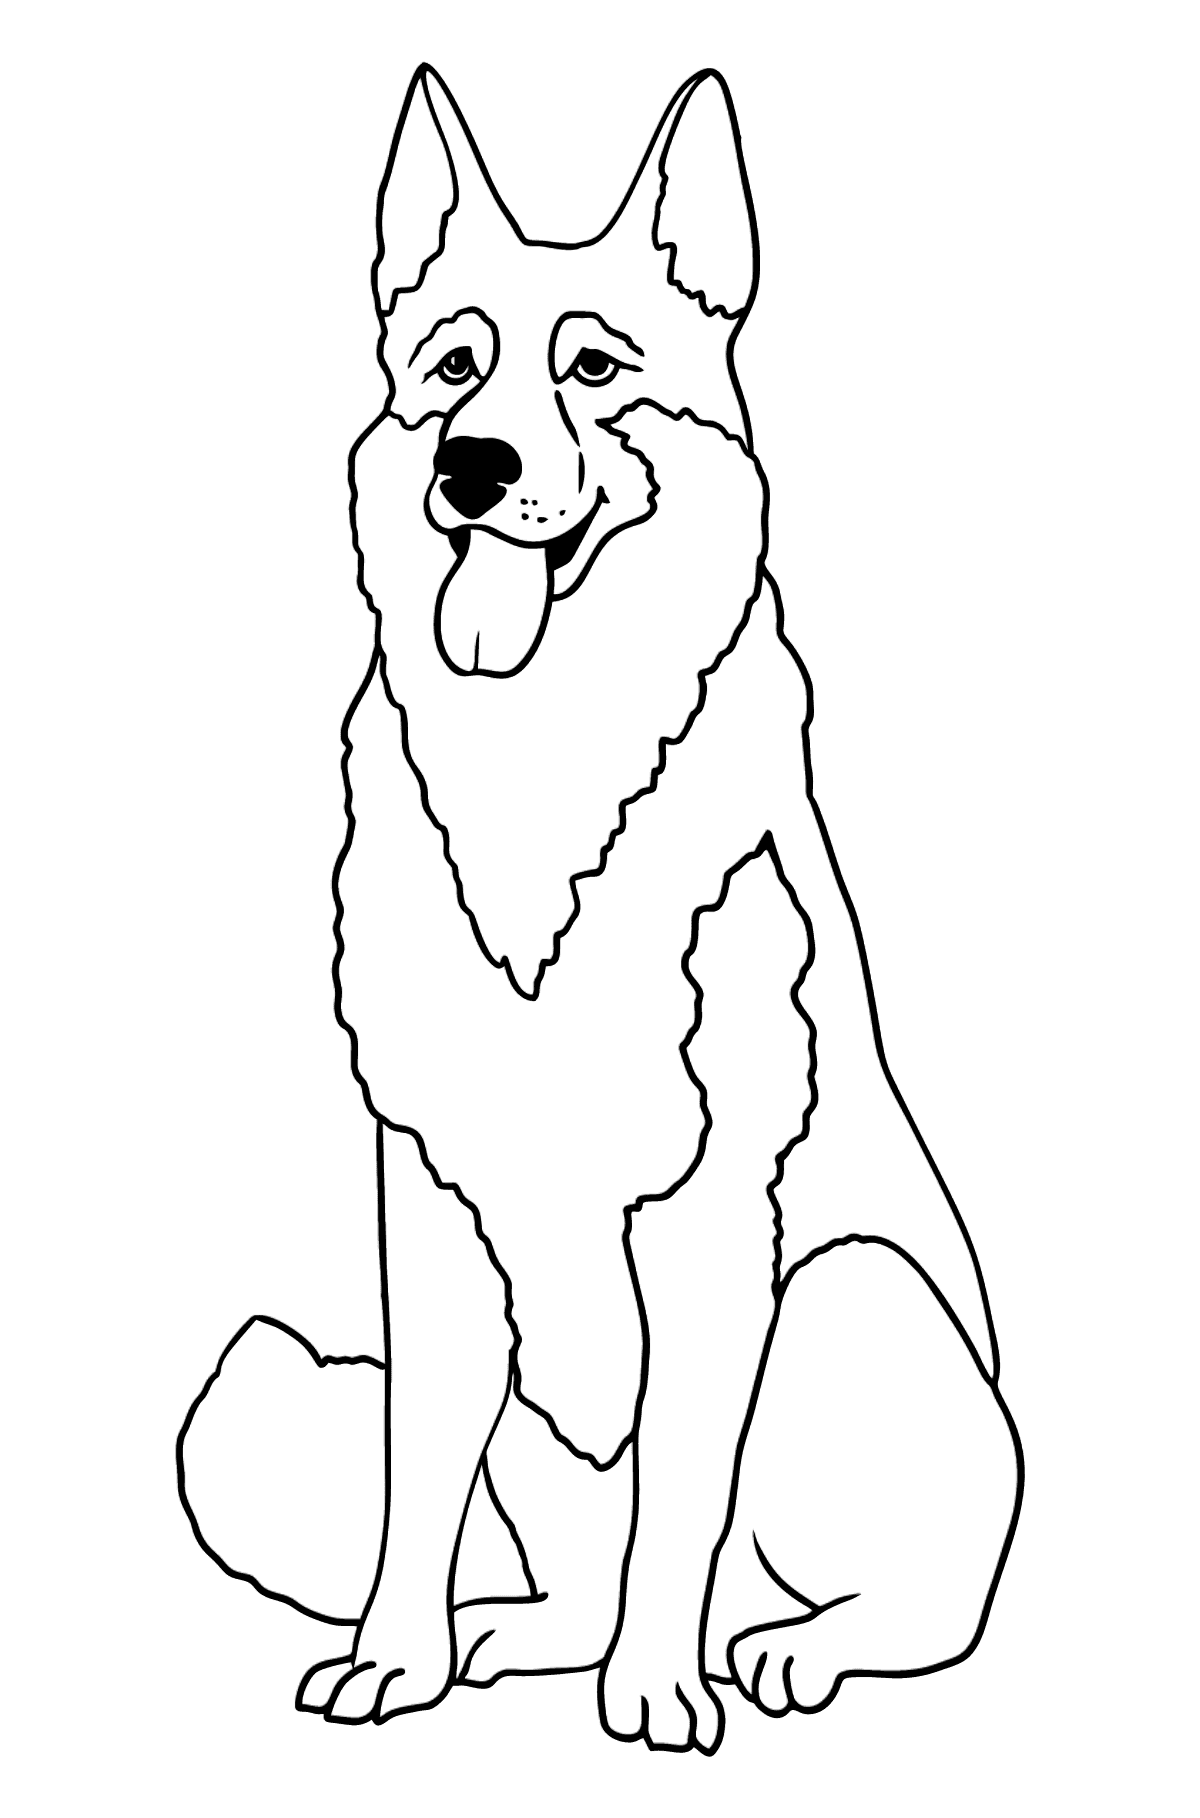 Shepherd coloring page - Coloring Pages for Kids